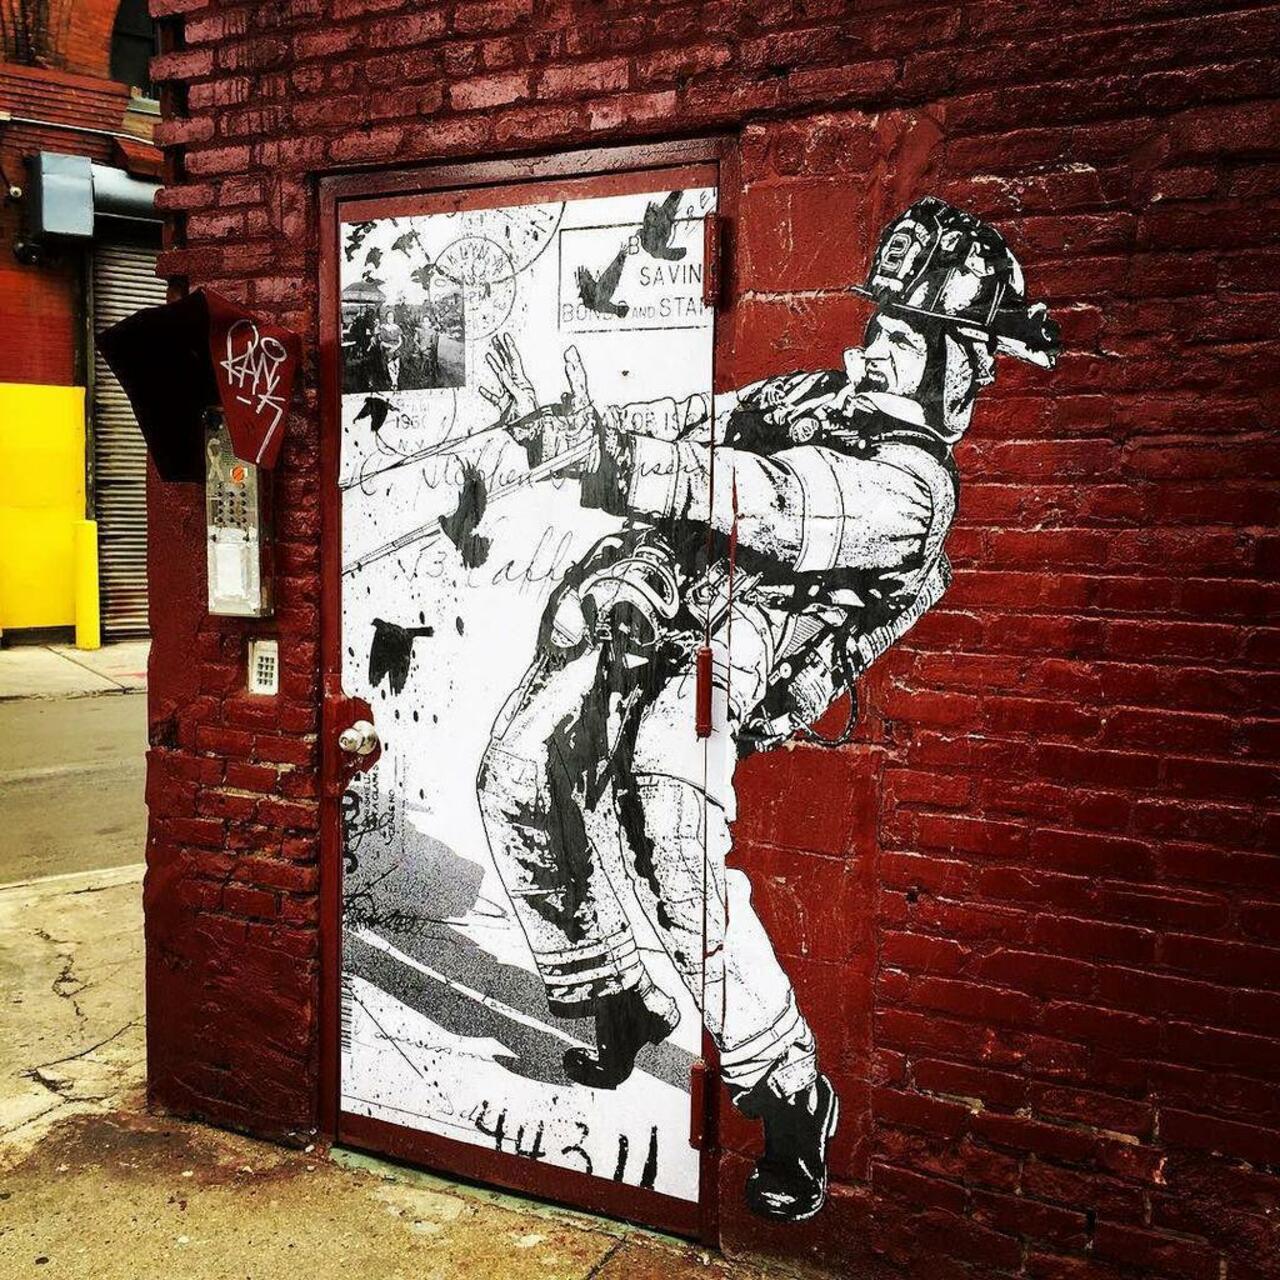 More @wkinteract in #Dumbo. These are great. #streetart #graffiti #fdny #wheatpaste #paste… http://bit.ly/1KIZ7mk http://t.co/ywIji9TF4O